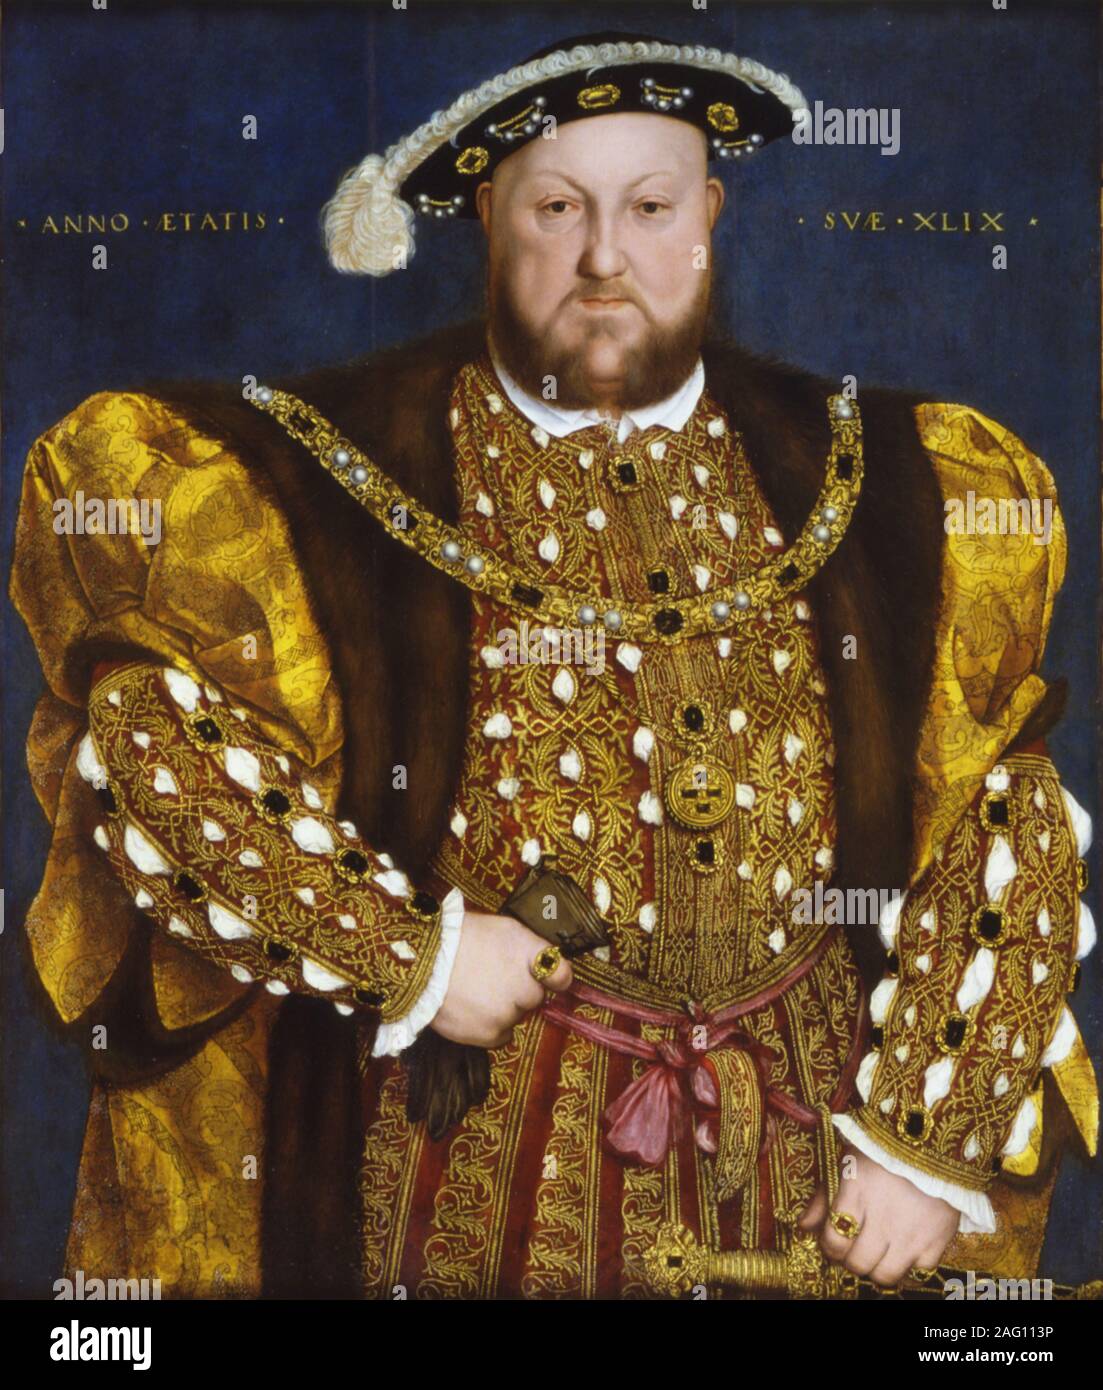 Portrait of King Henry VIII of England, 1540. Found in the Collection of Galleria Nazionale d'Arte Antica, Rome. Stock Photo